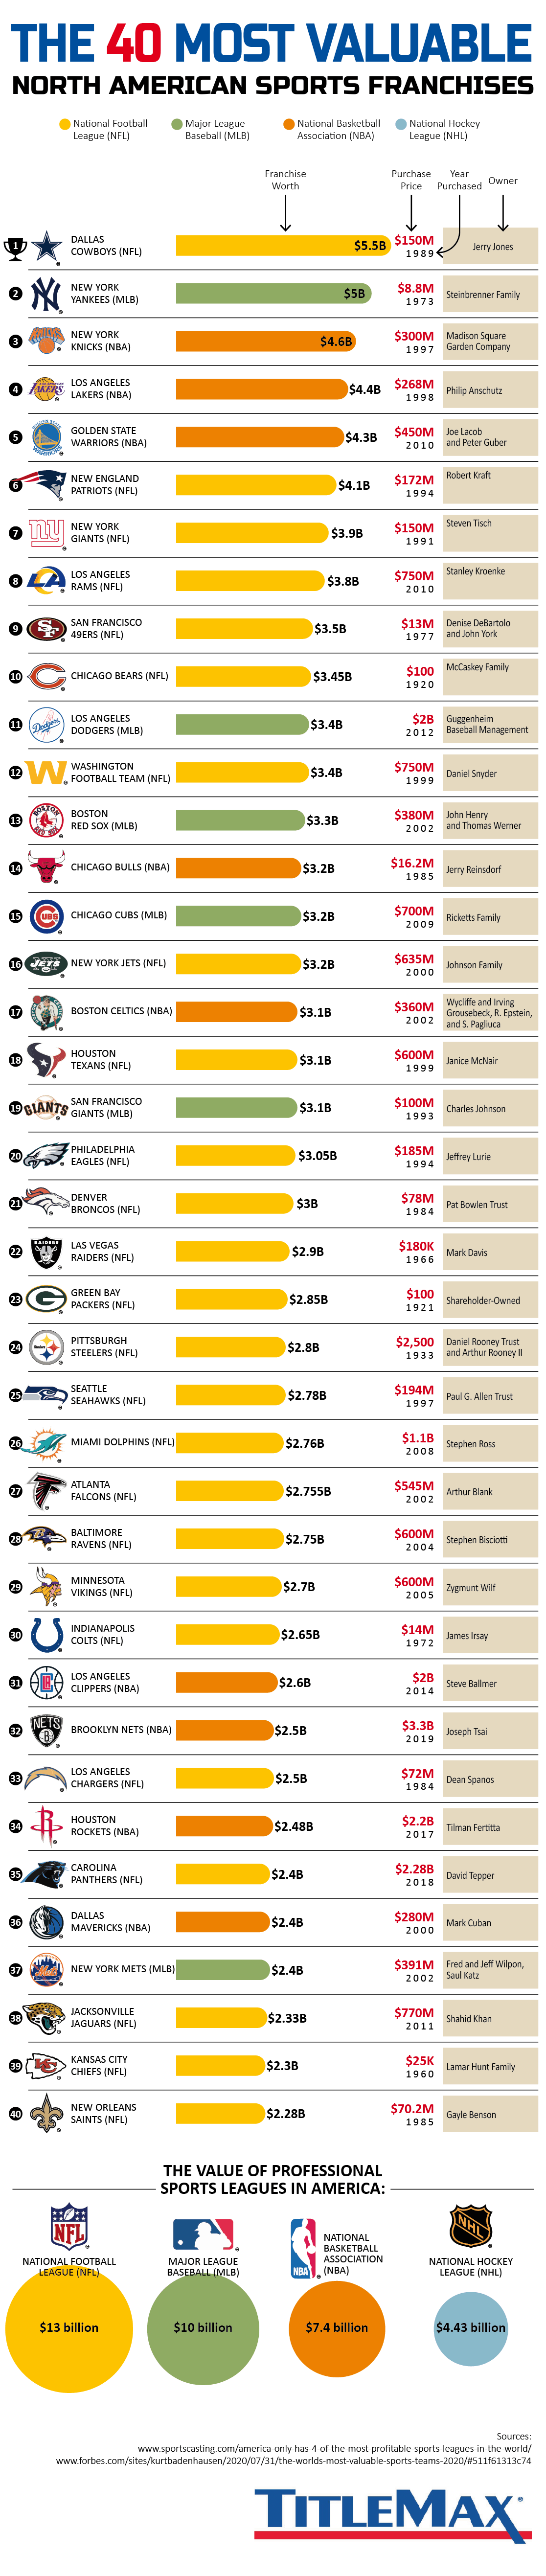 The Most Valuable Sports Franchises in North America